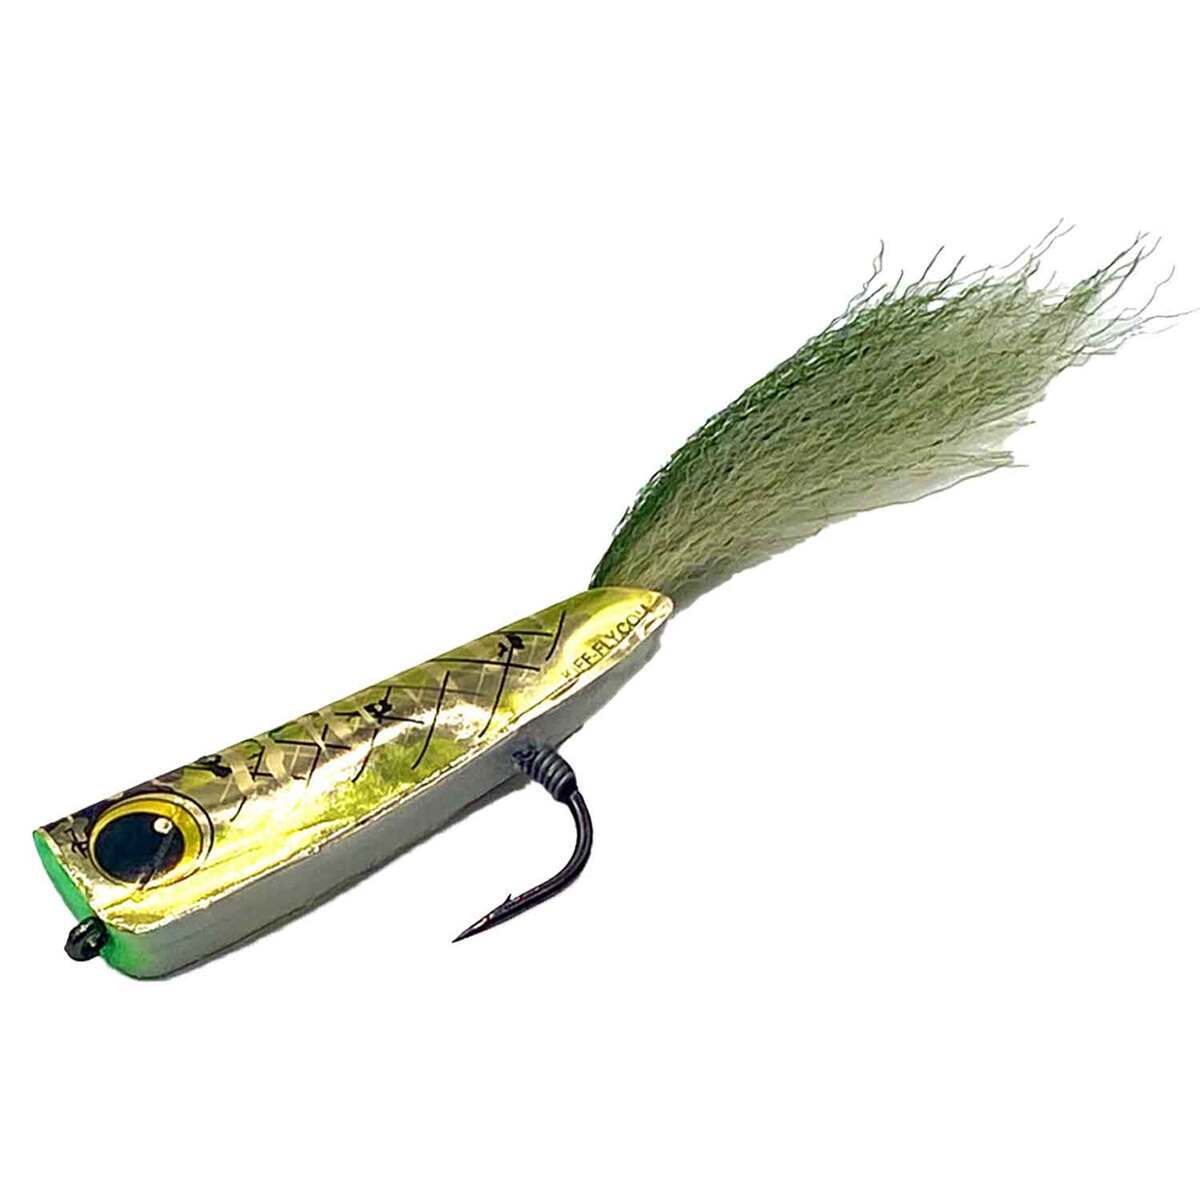 RoundRocks Top 20 Trout Flies Assortment by Sportsman's Warehouse